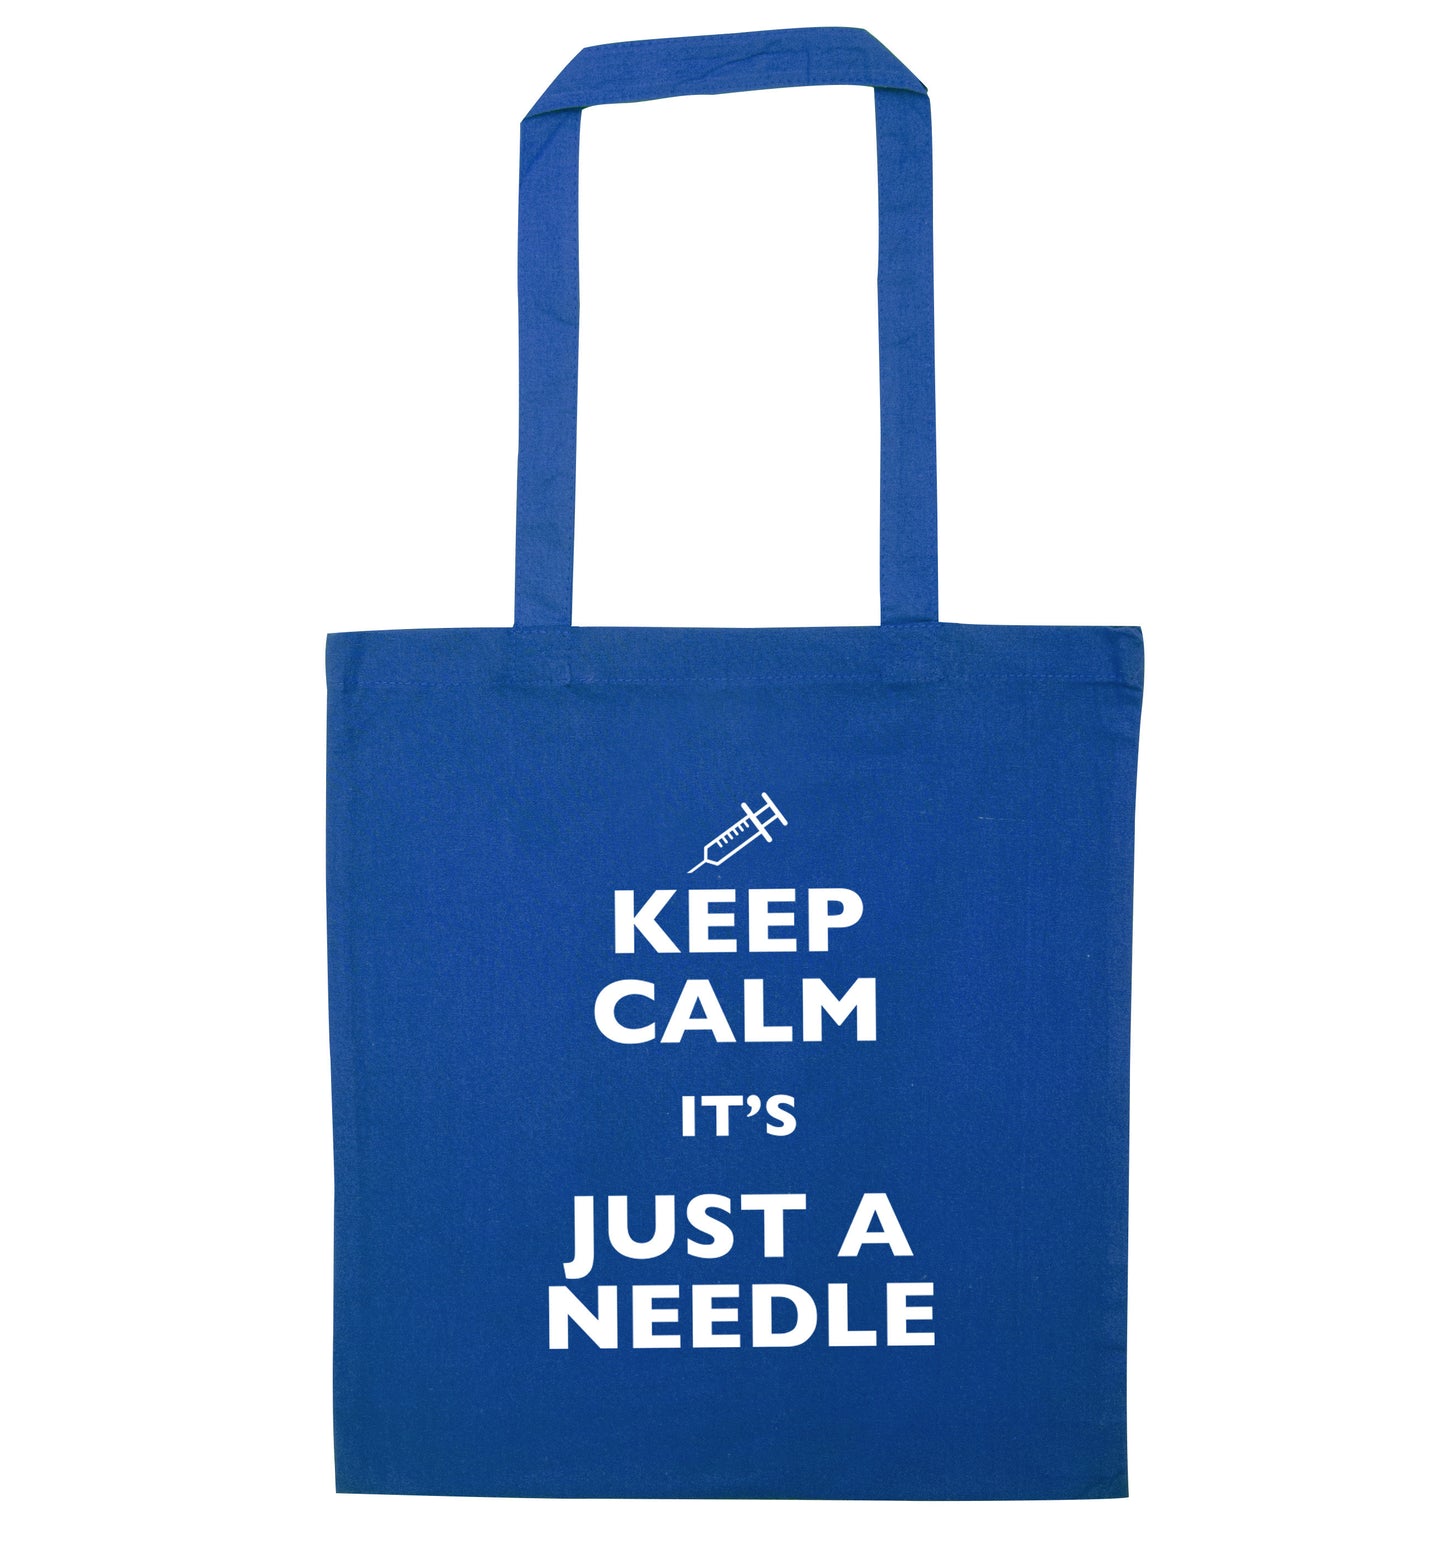 Keep calm it's only a needle blue tote bag